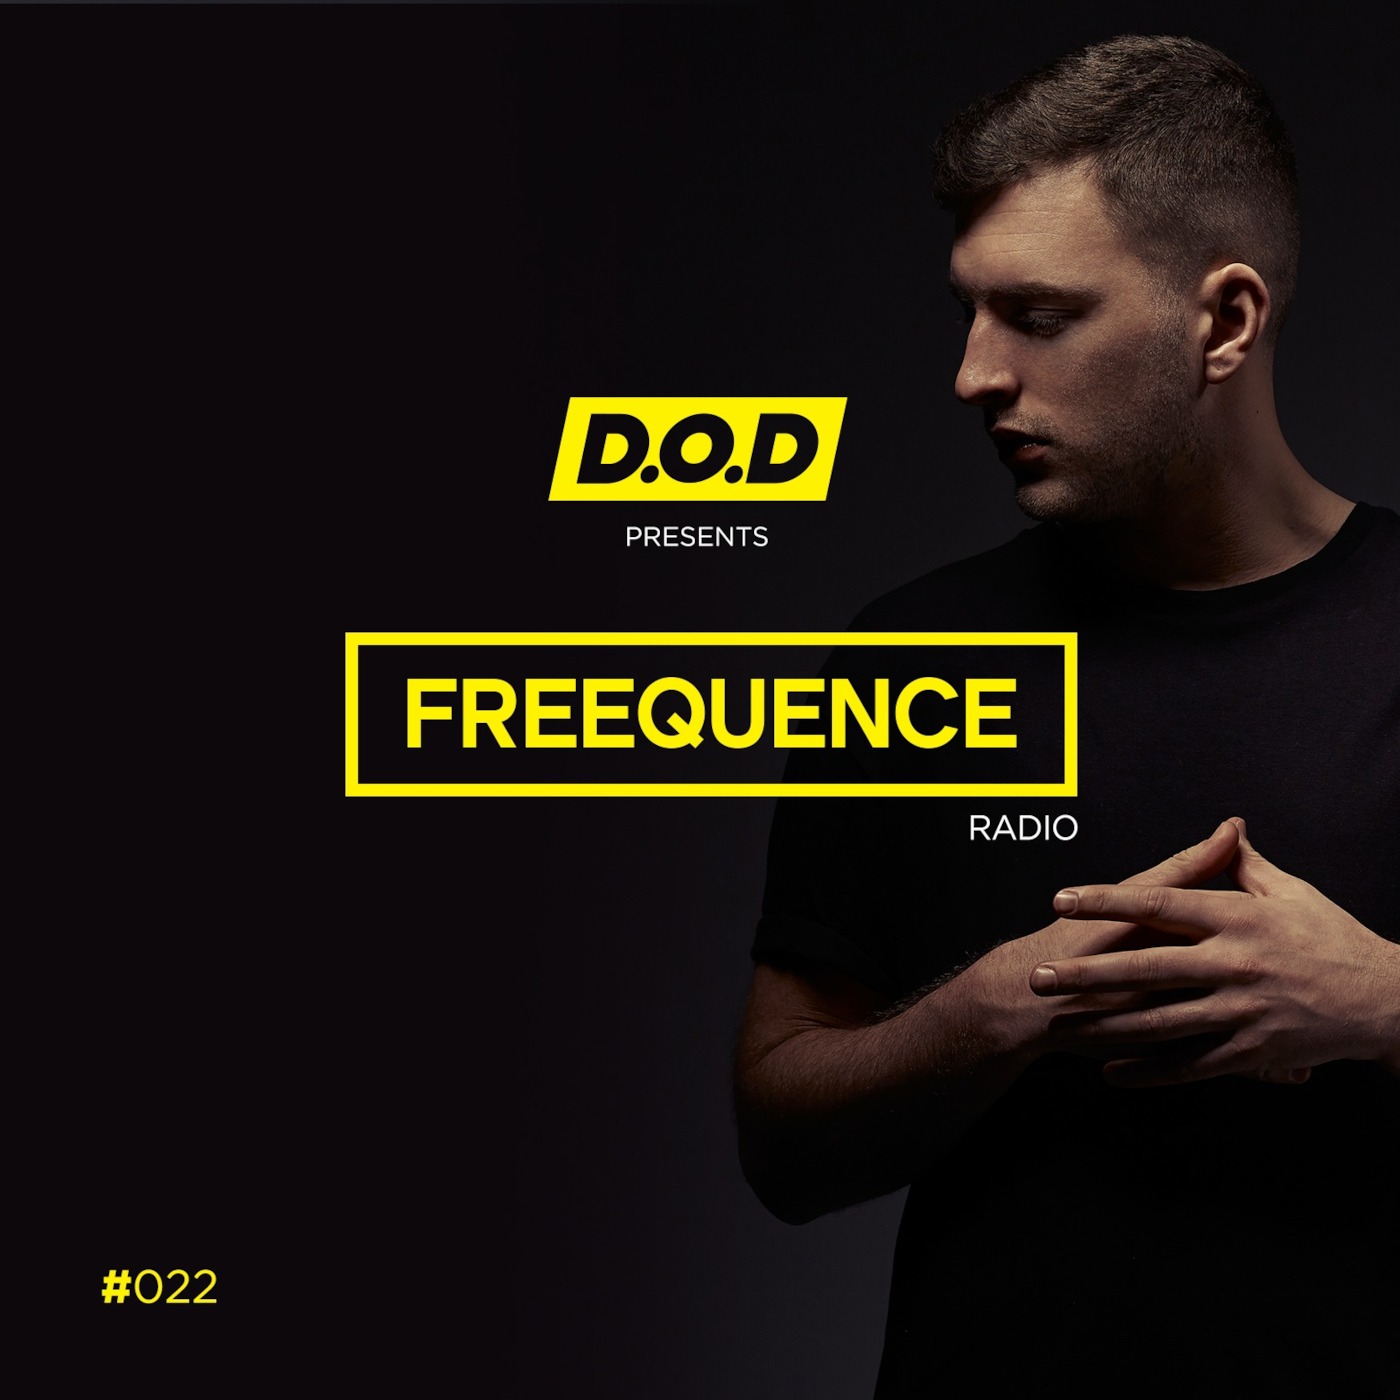 #FREEQUENCE Radio with D.O.D #022